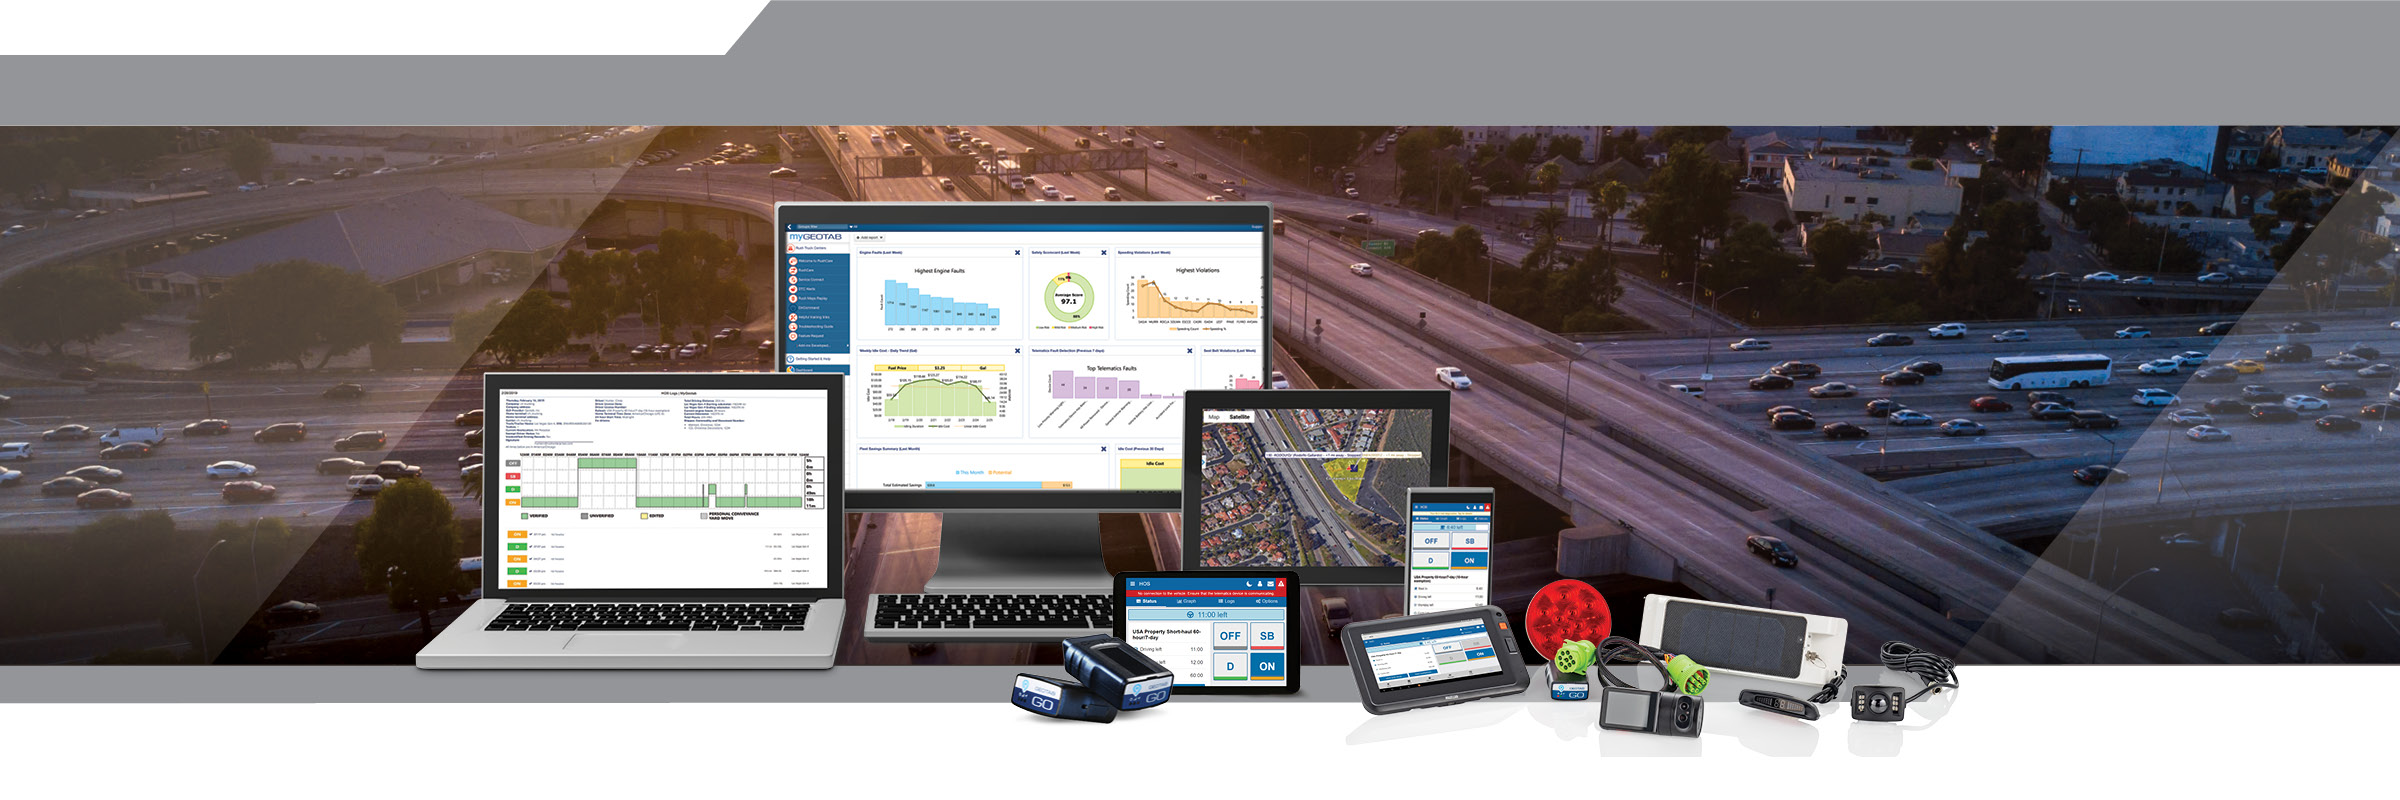 Telematics hardware devices and dashboards